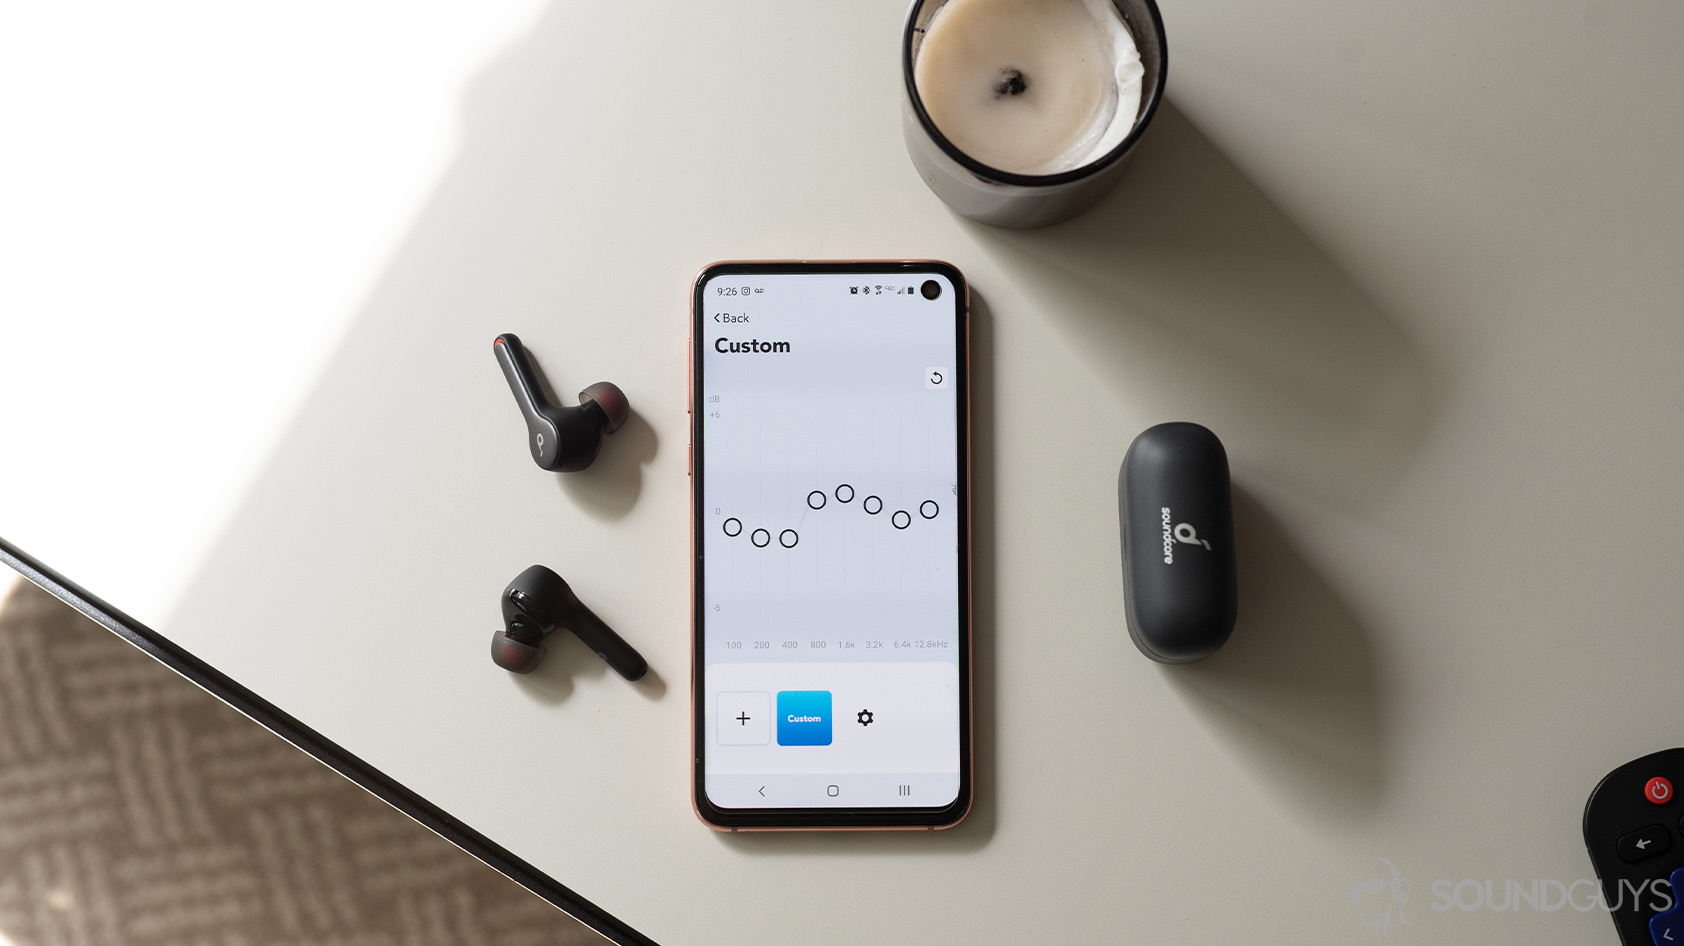 An aerial picture of the Anker SoundCore Liberty Air 2 true wireless earbuds next to a Samsung Galaxy S10e with the SoundCore mobile app equalizer open.